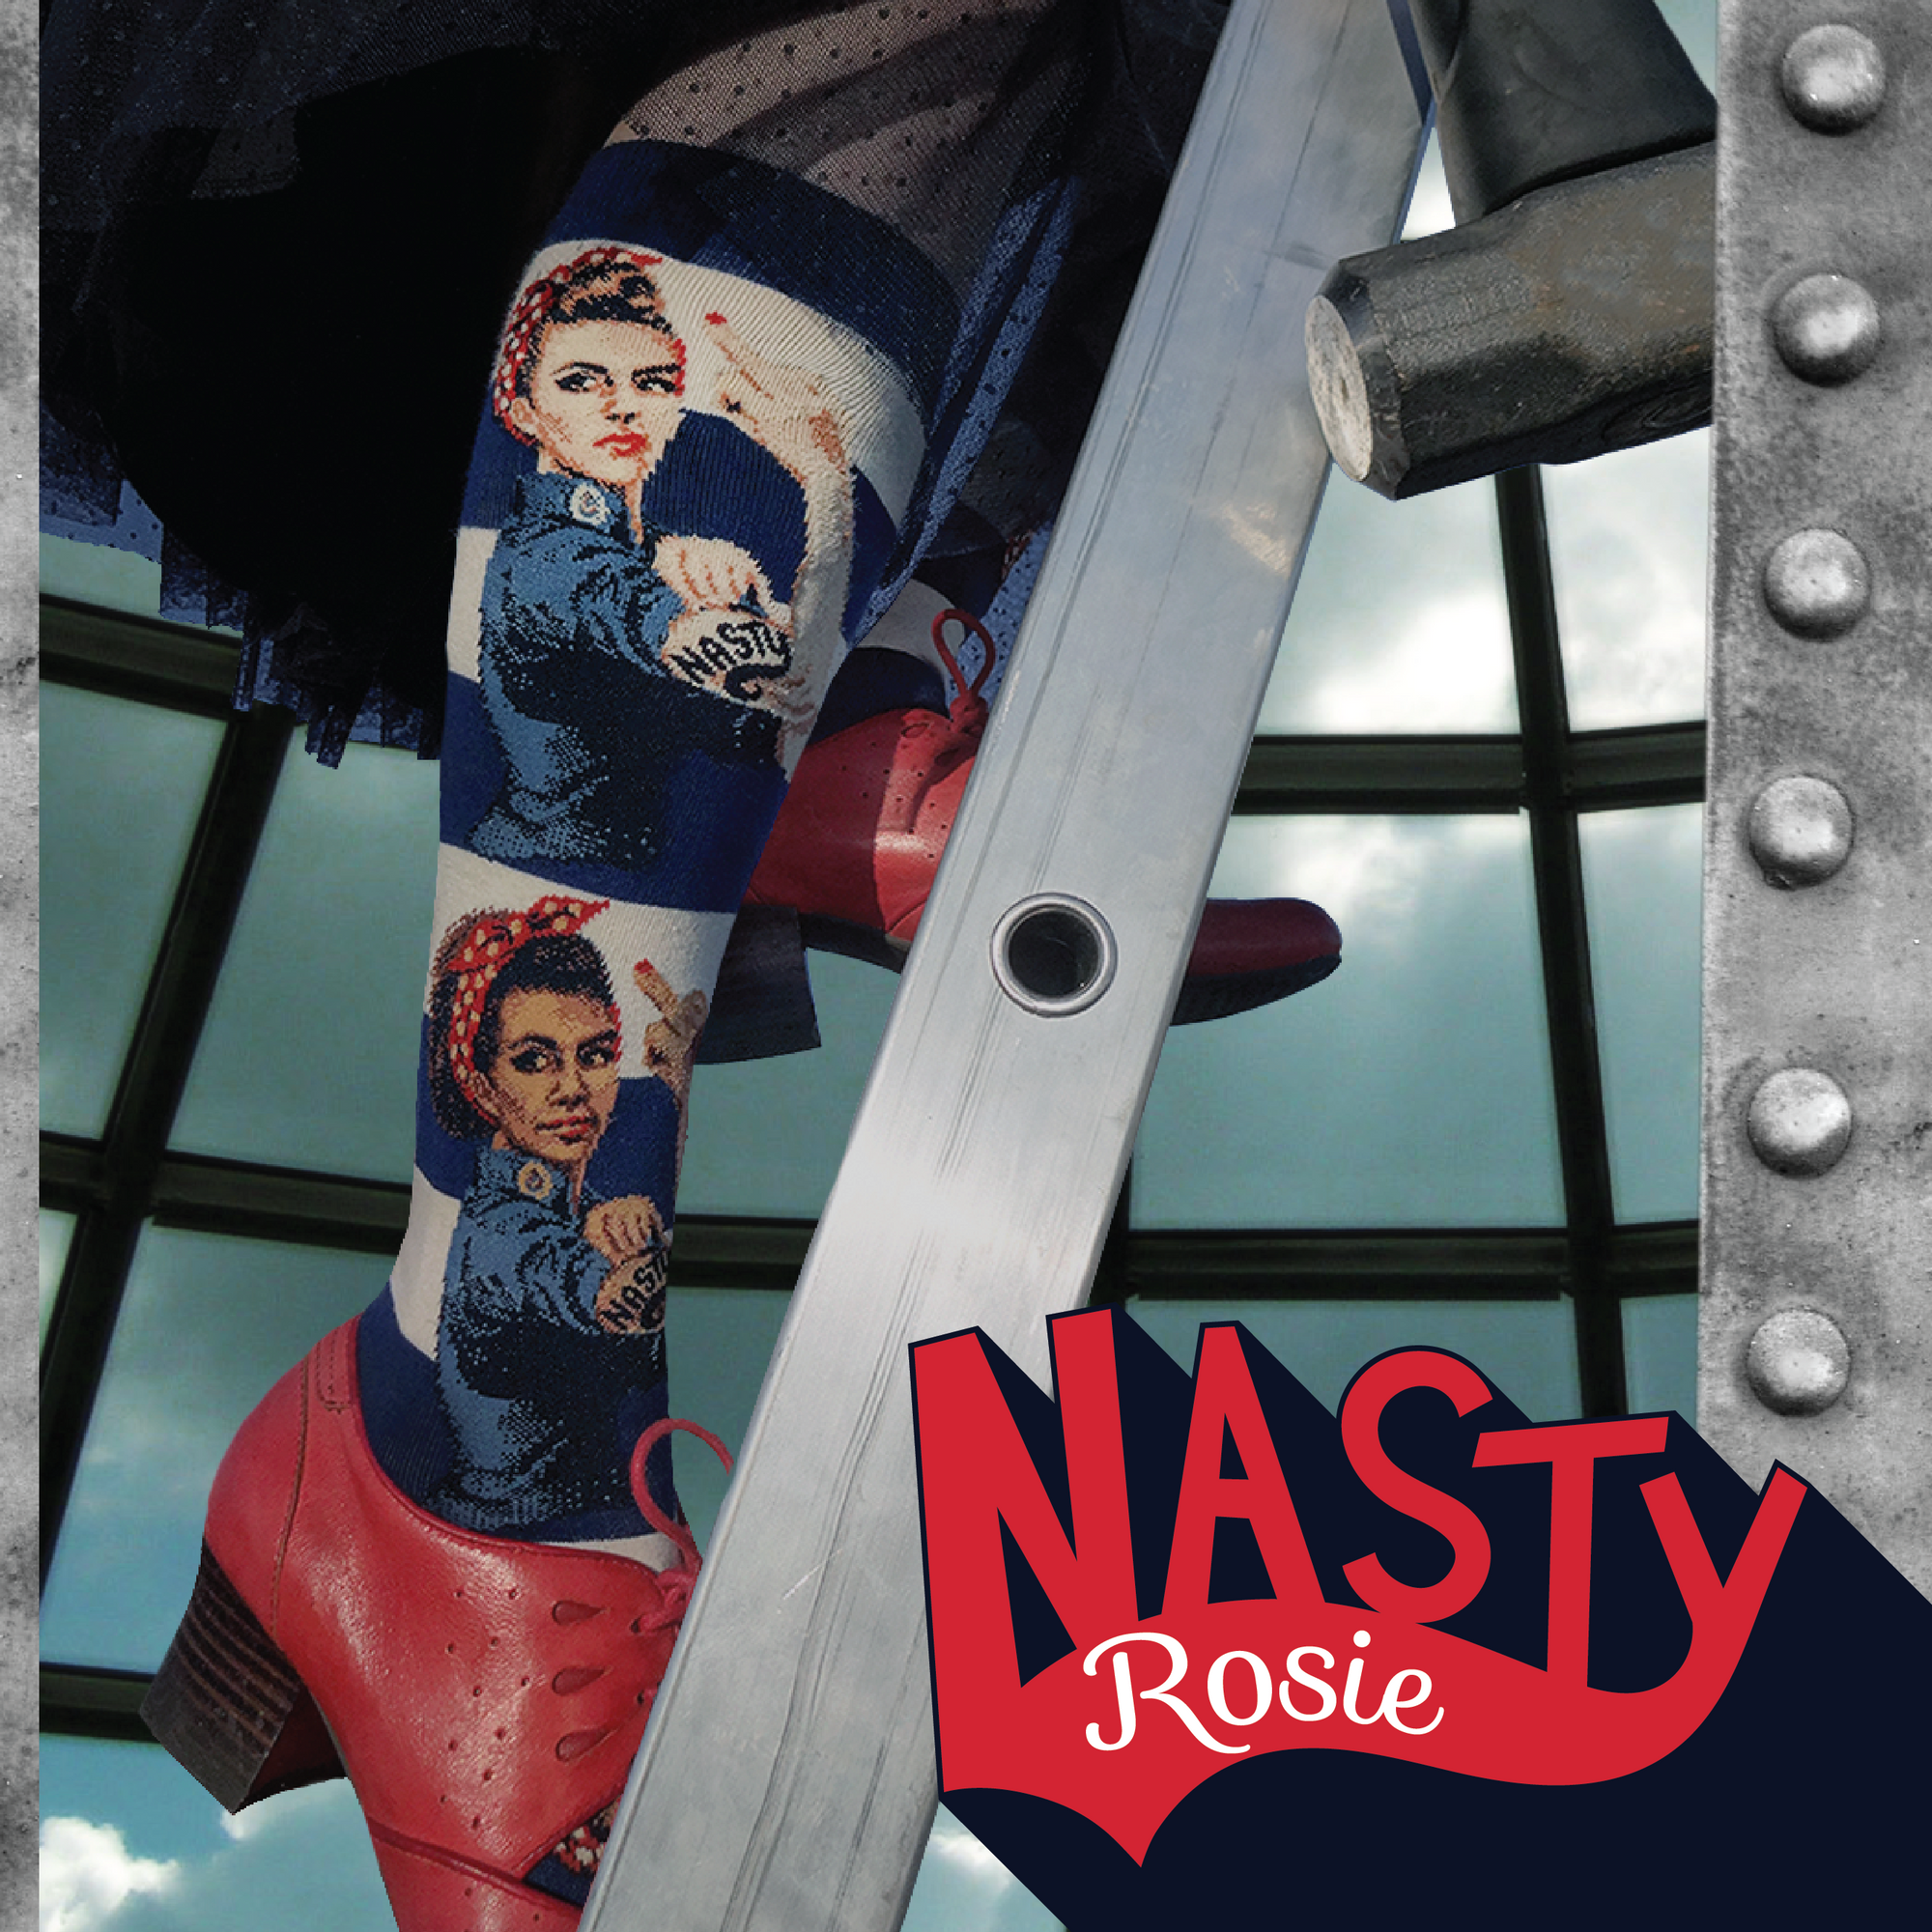 Knee-high socks with nasty Rosie the Riveters with different skin colors on a navy and cream striped background